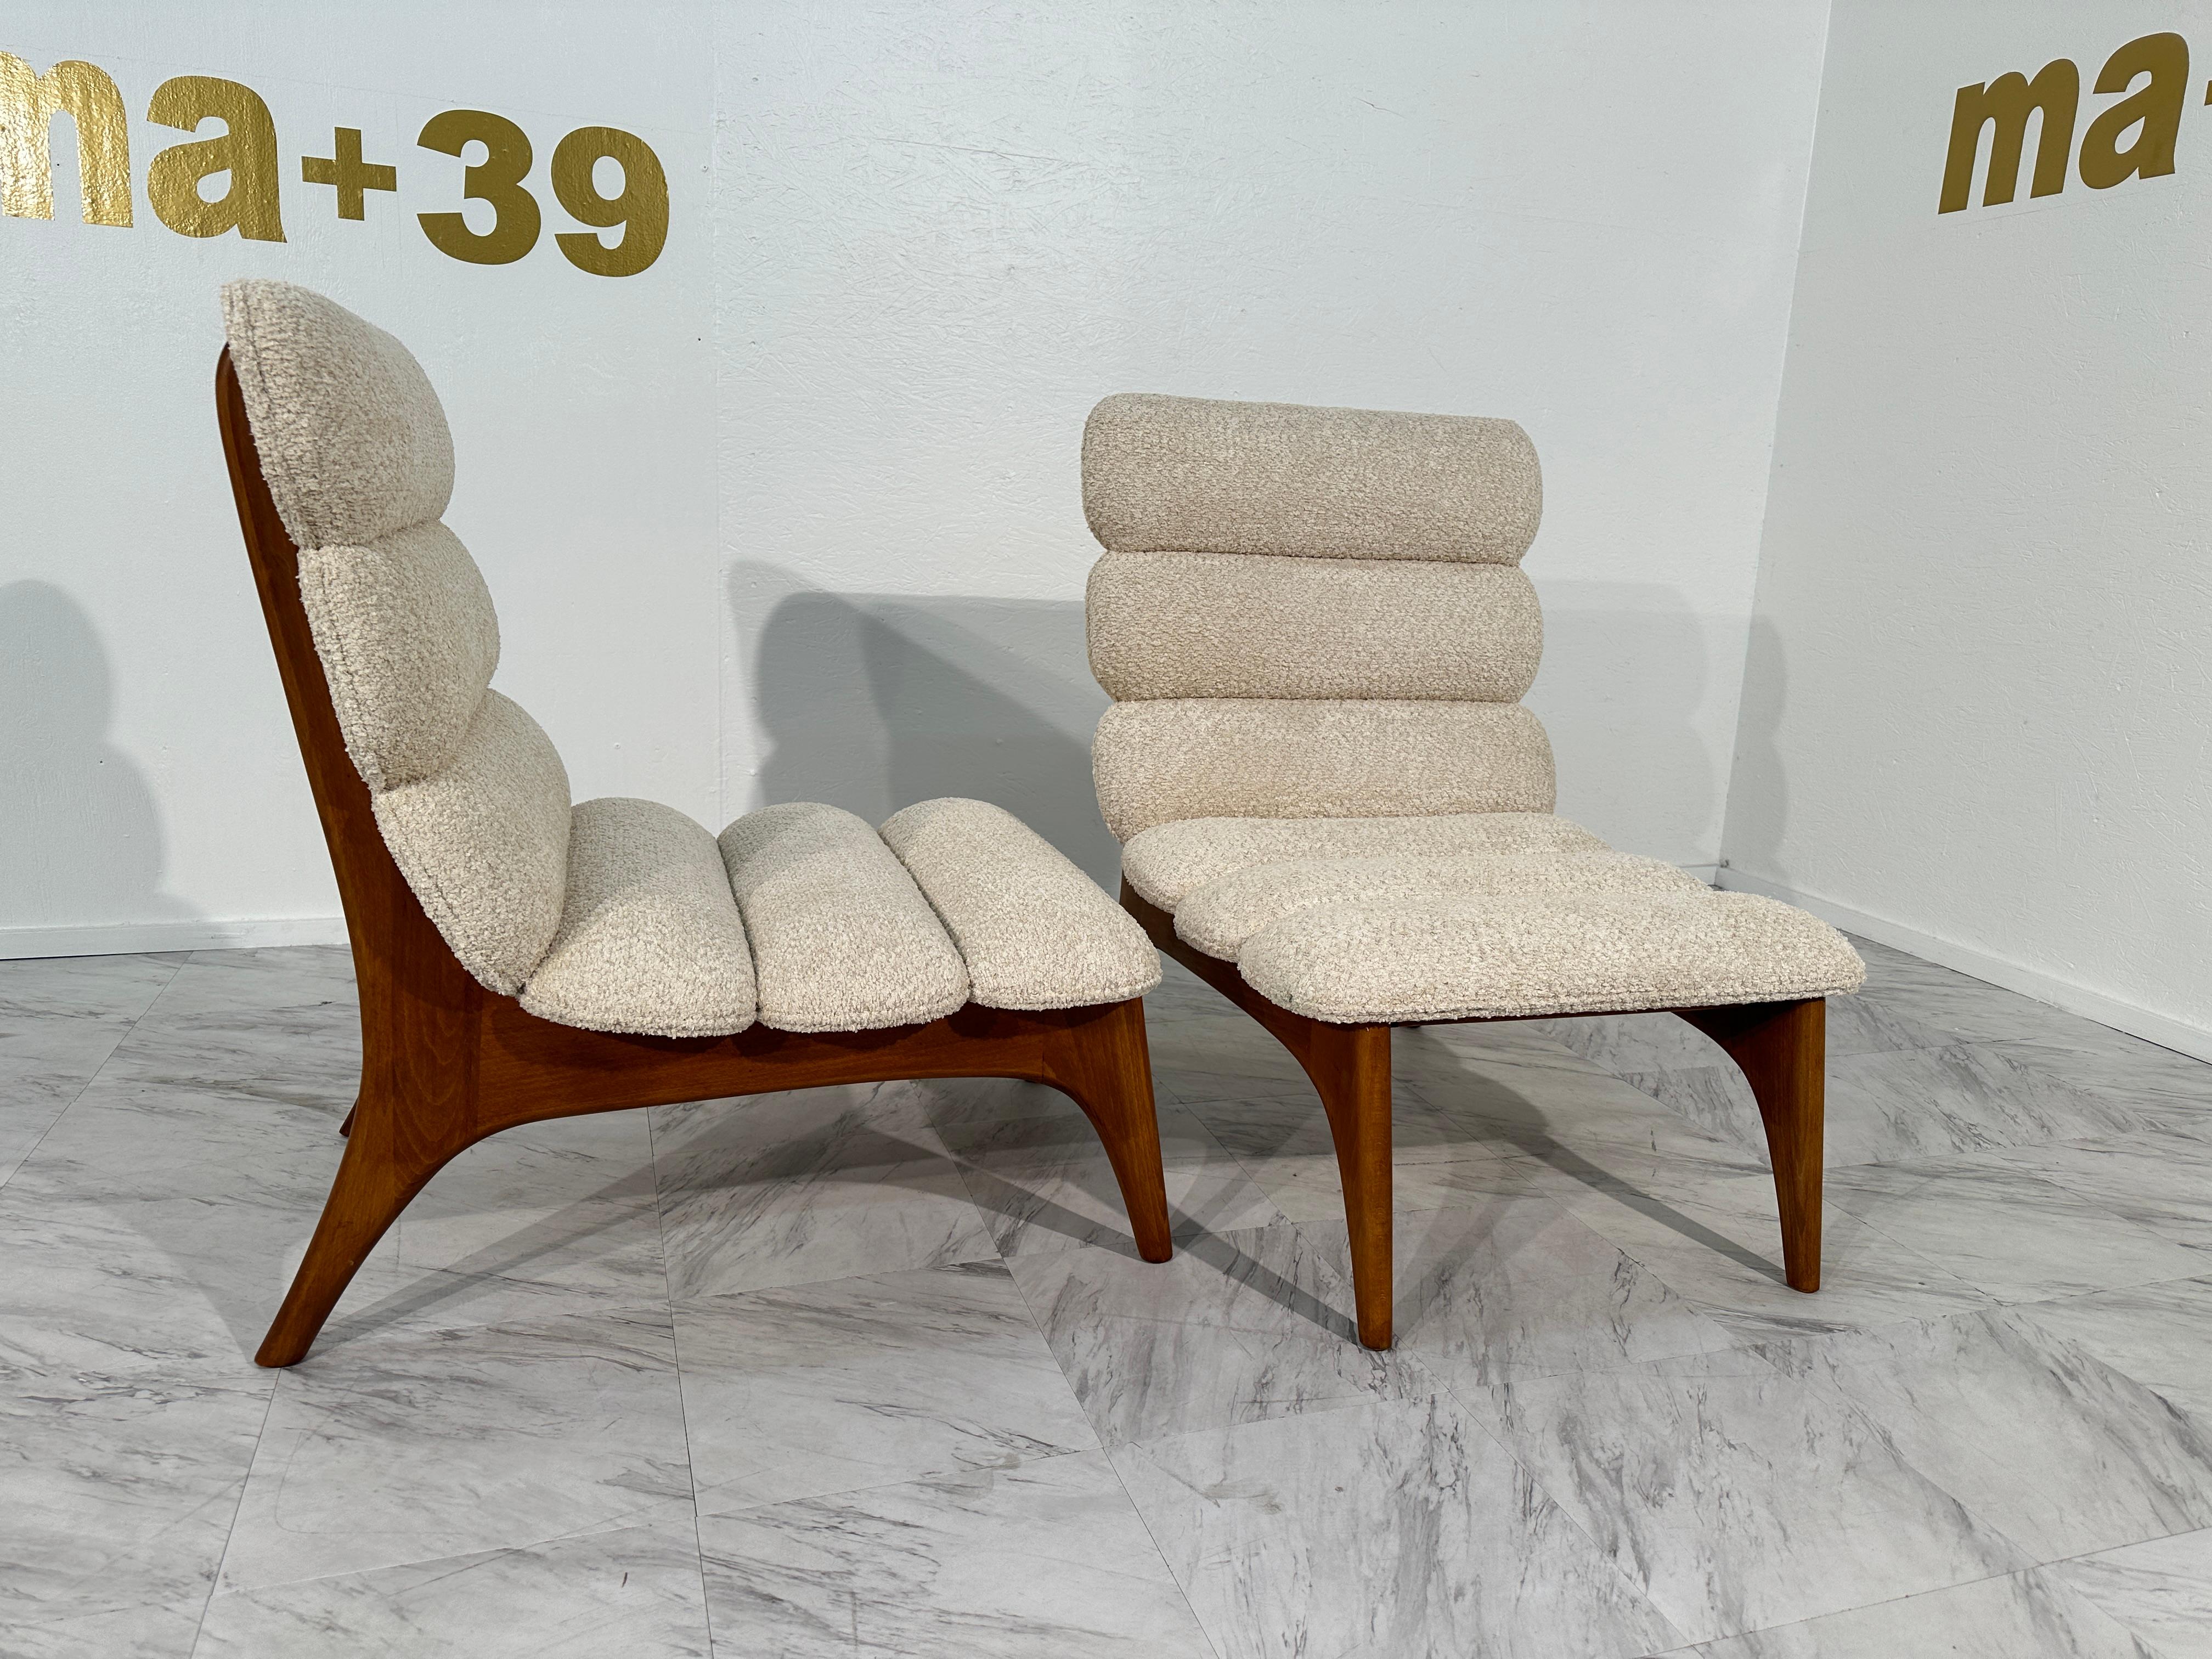 Bouclé Pair of Mid-Century Modern Danish Lounge Chairs in Boucle Fabric 1980s For Sale